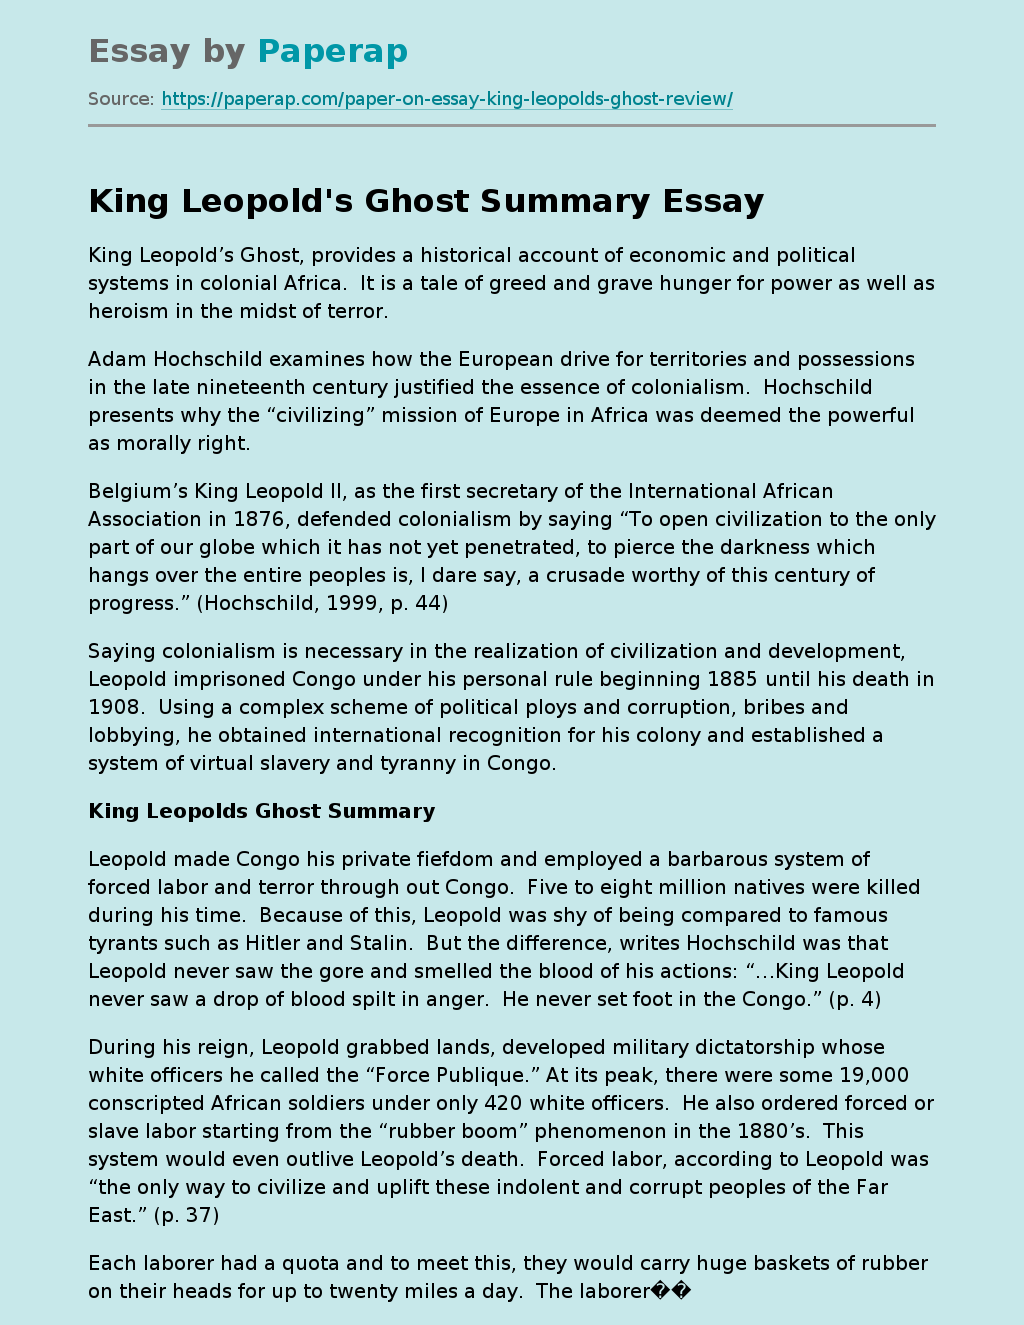 King Leopold's Ghost Summary